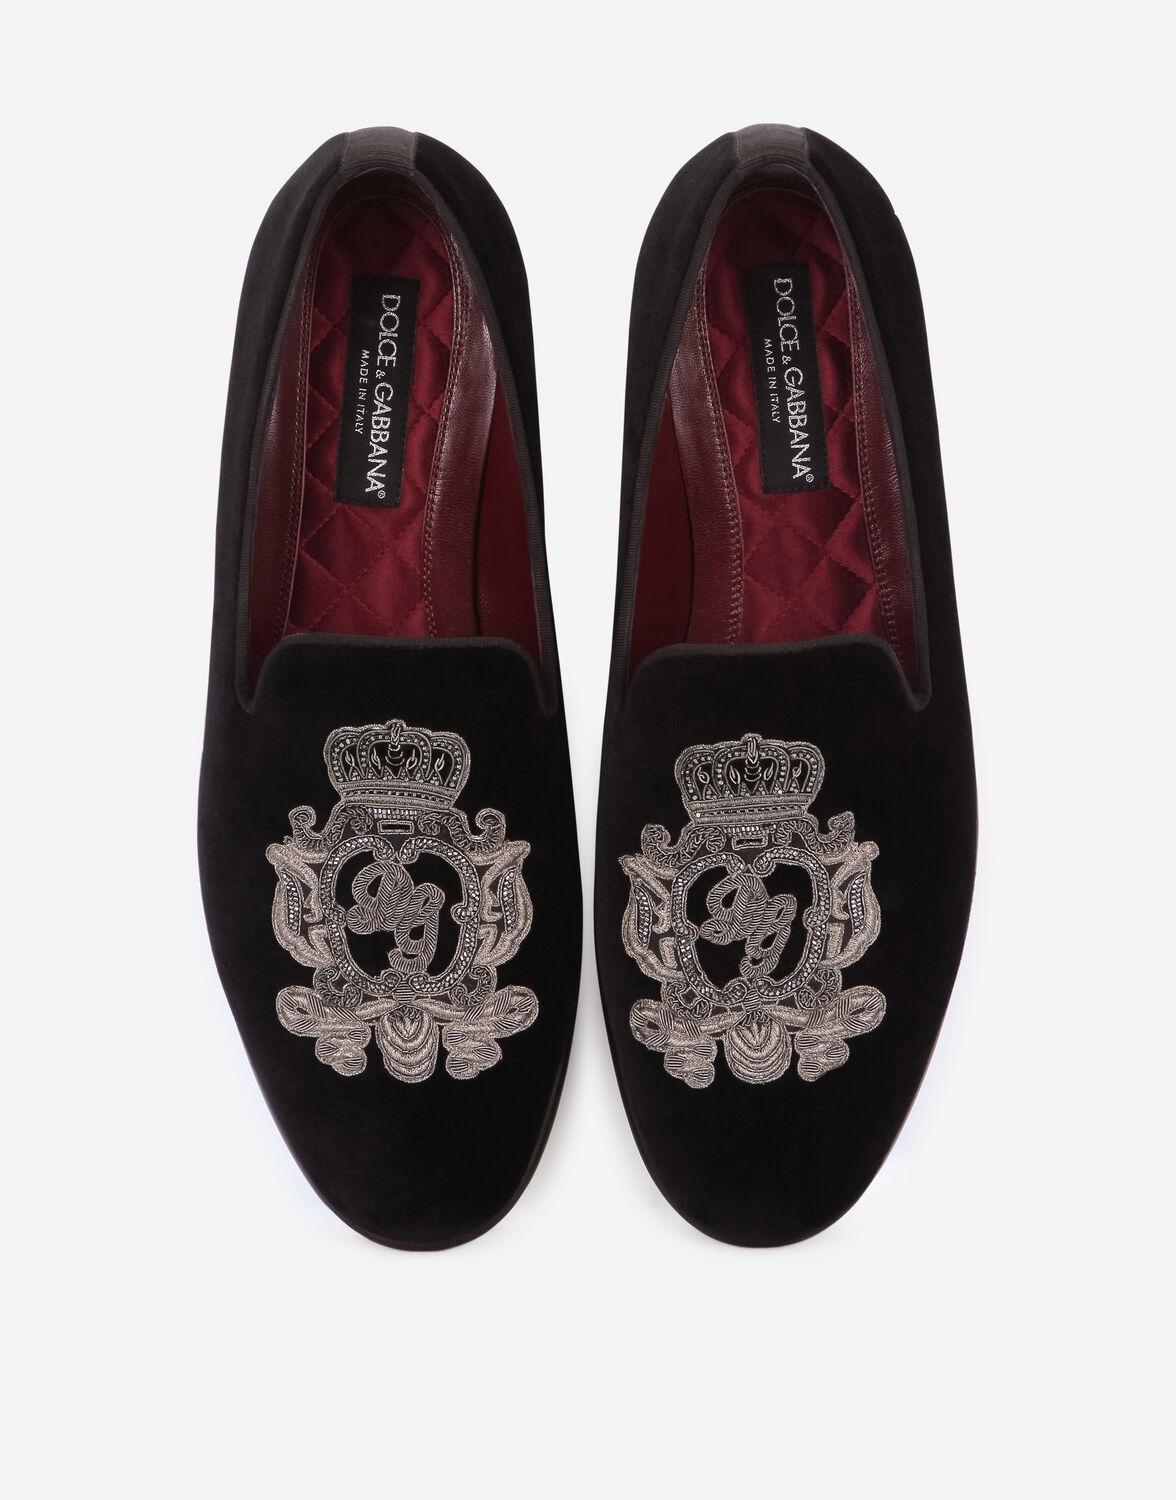 Dolce & Gabbana Velvet Slippers With Coat Of Arms Embroidery in 